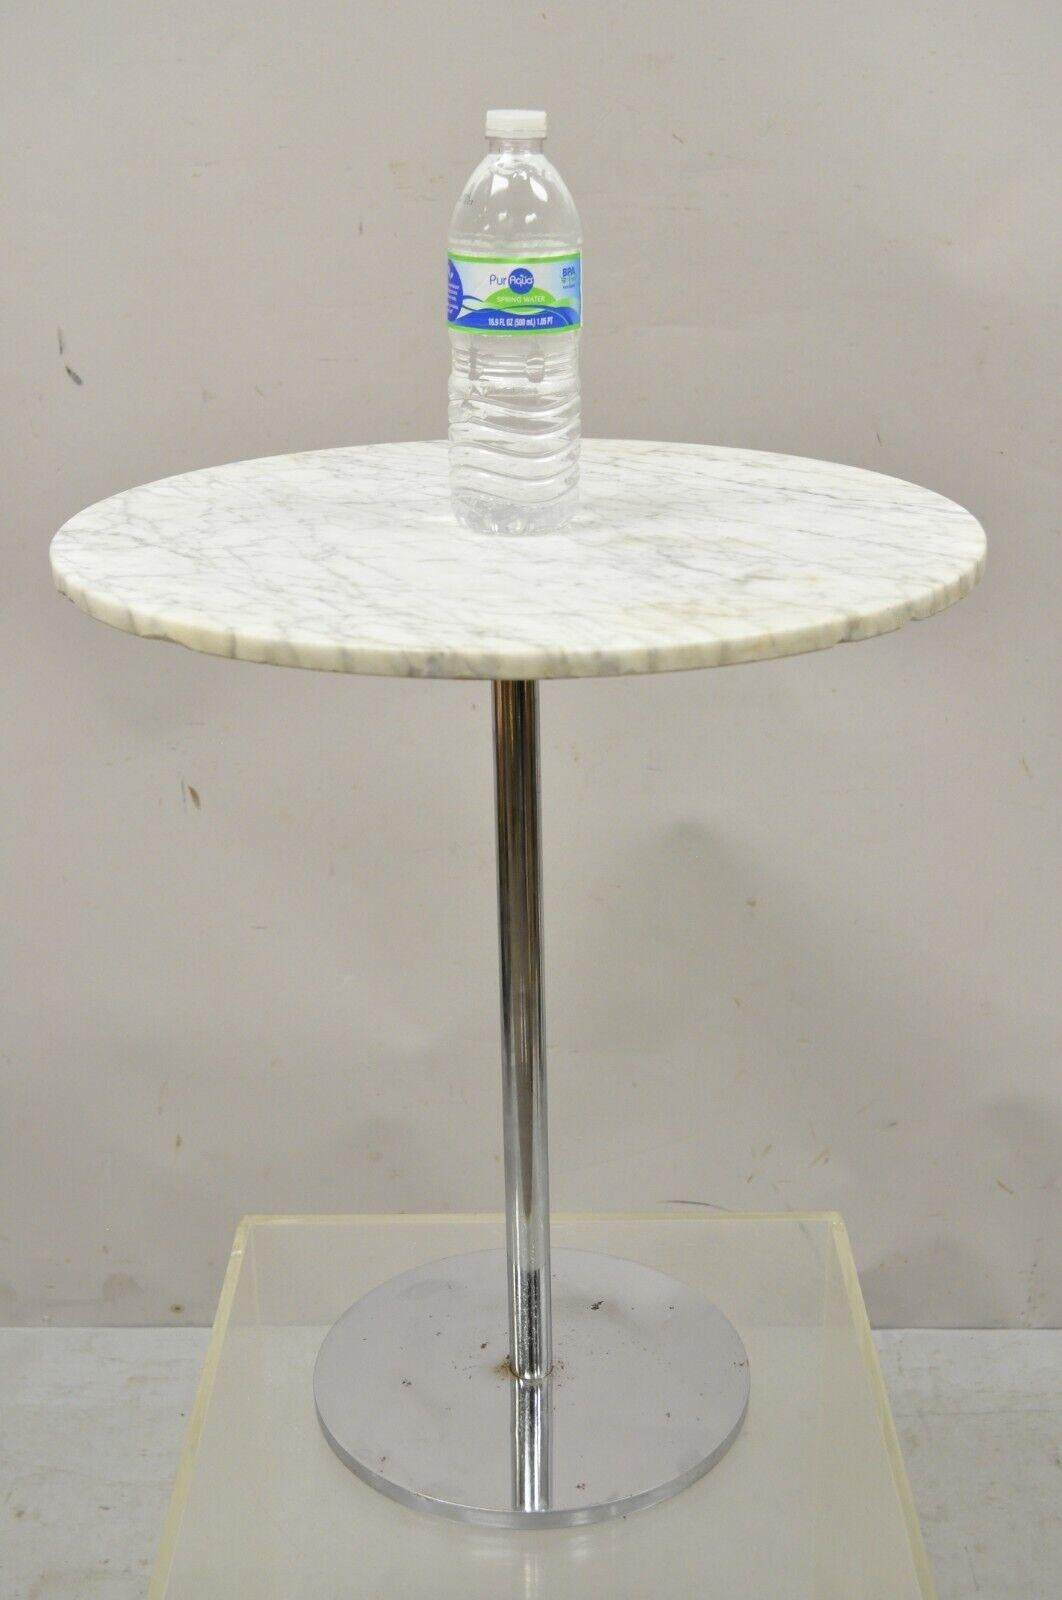 Hugh Acton round marble top chrome lollipop cocktail occasional side table. Item features a round white marble top, chrome pedestal base, nice small size, original label, clean modernist lines. Circa 1960s. Measurements: 20.25